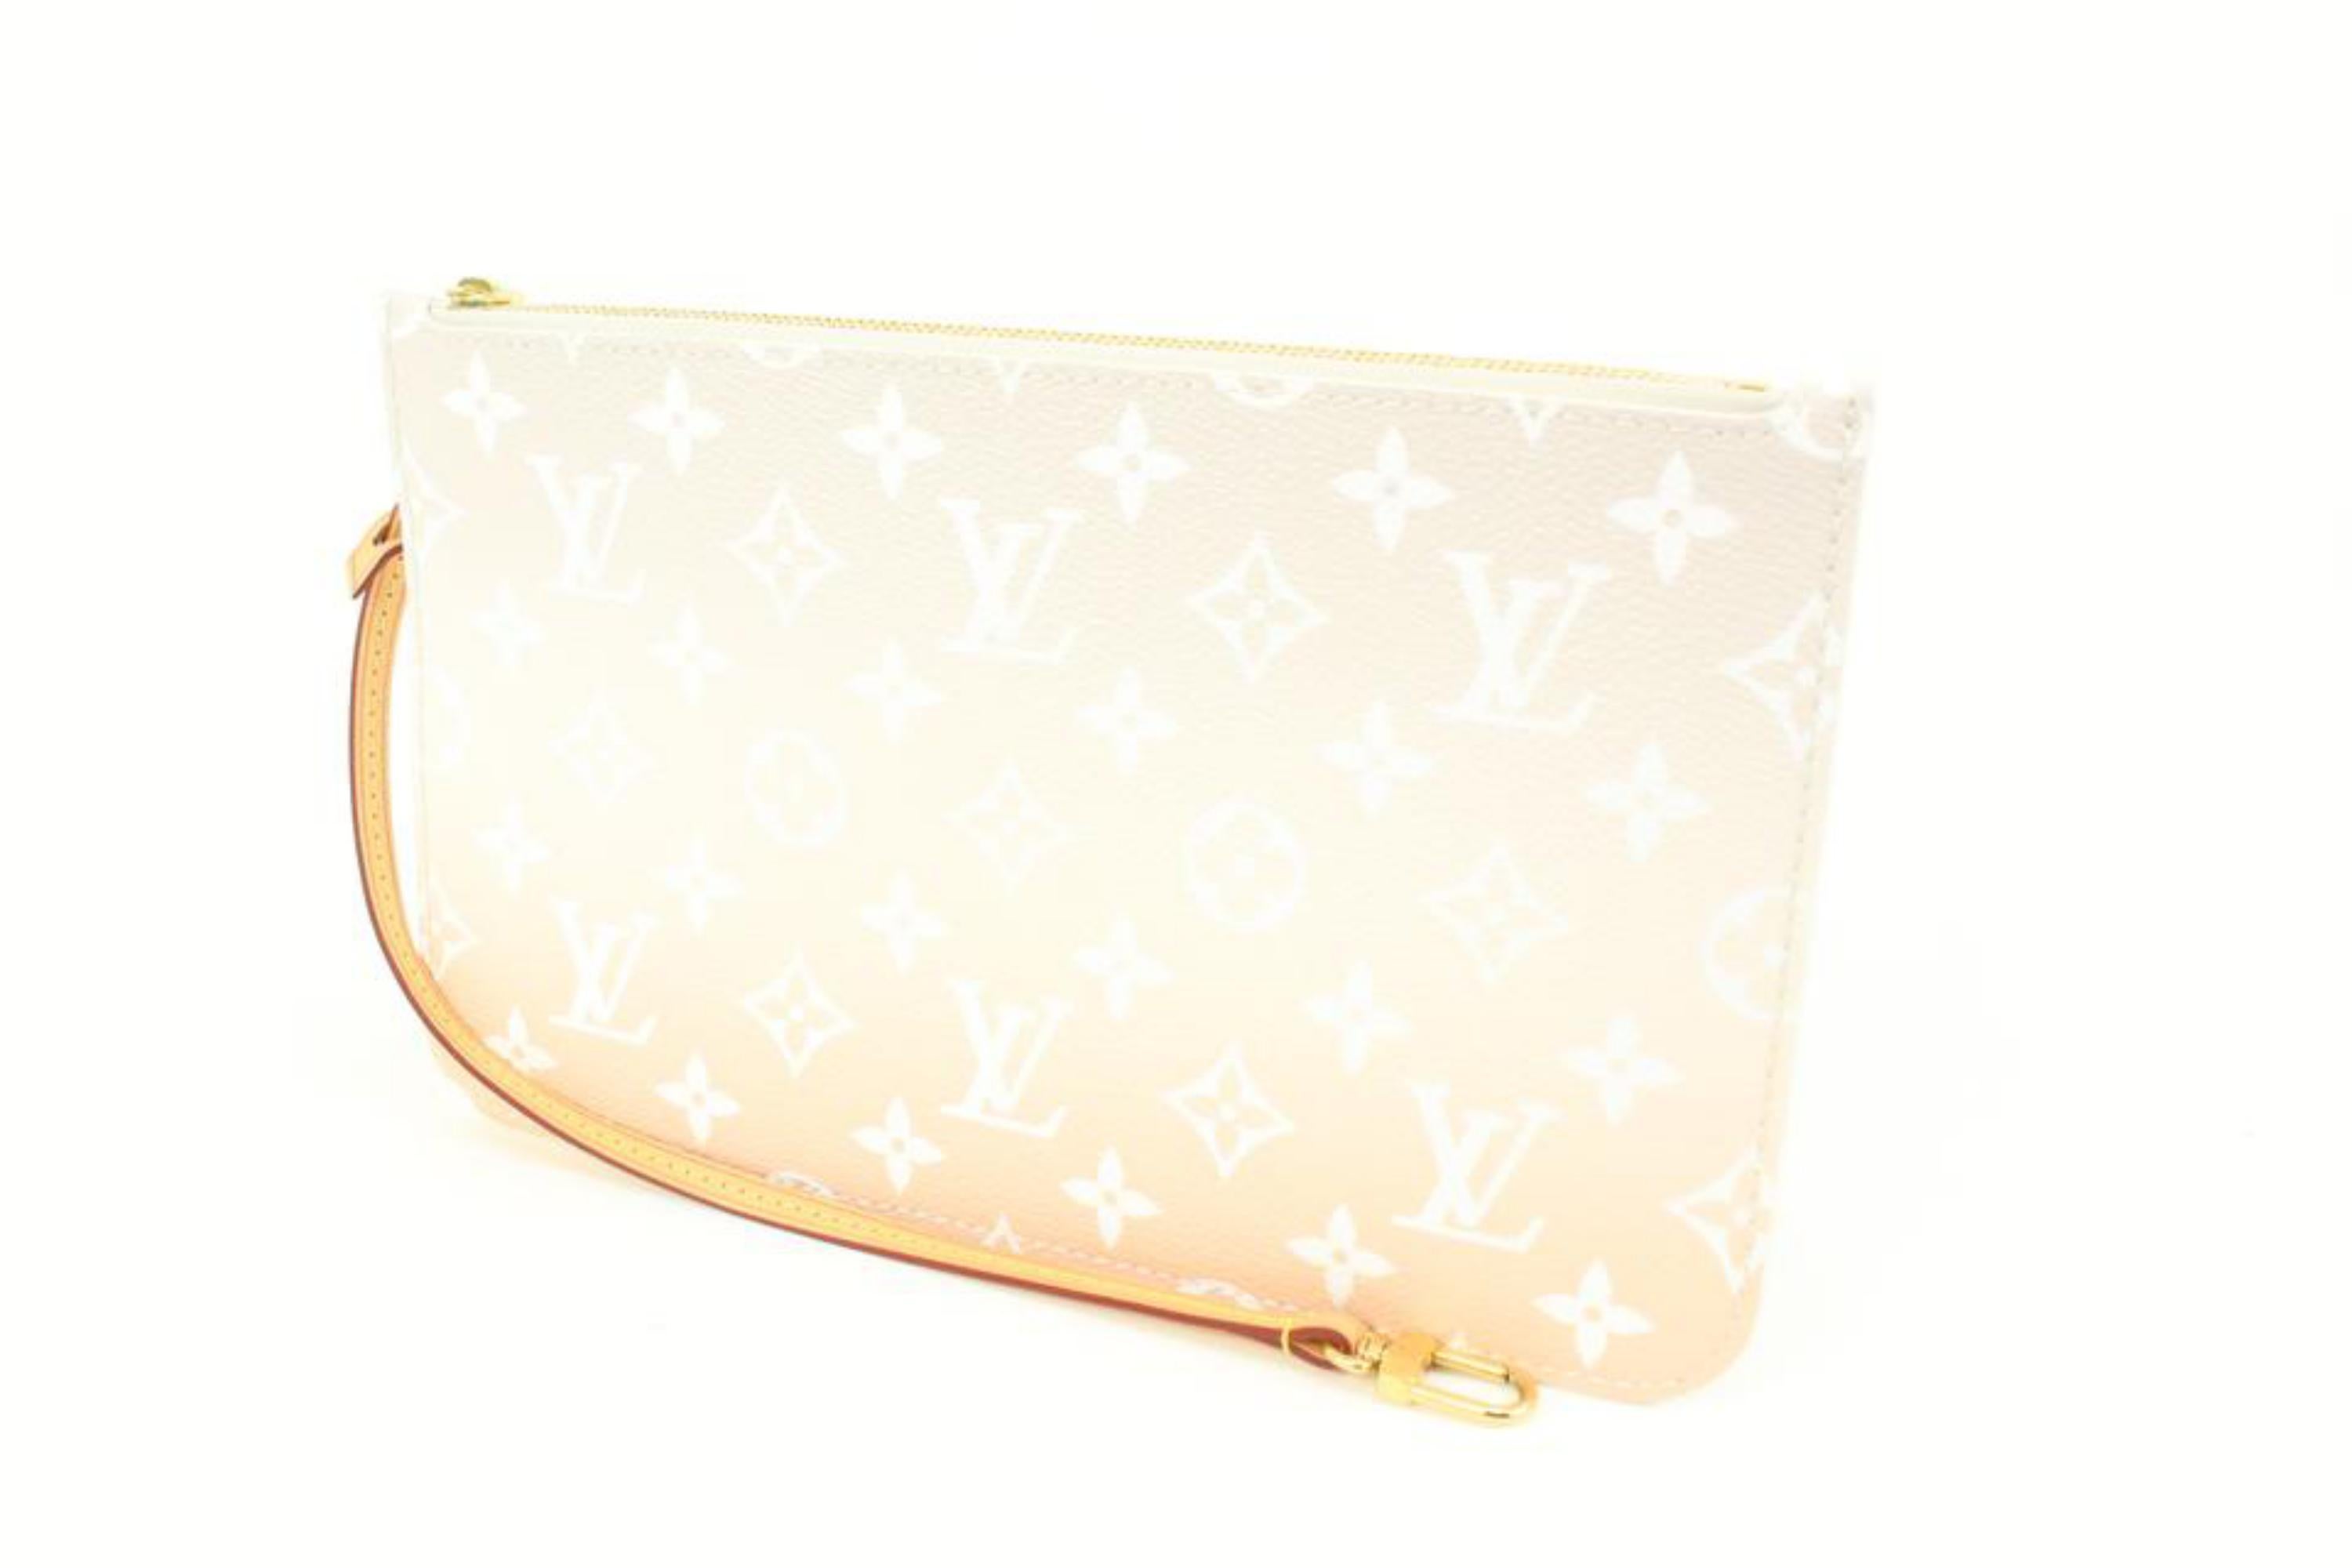 Louis Vuitton Peach Mist Monogram By the Pool Neverfull Pochette MM Pouch 87lk412s
Date Code/Serial Number: LU5220
Made In: France
Measurements: Length:  9.75